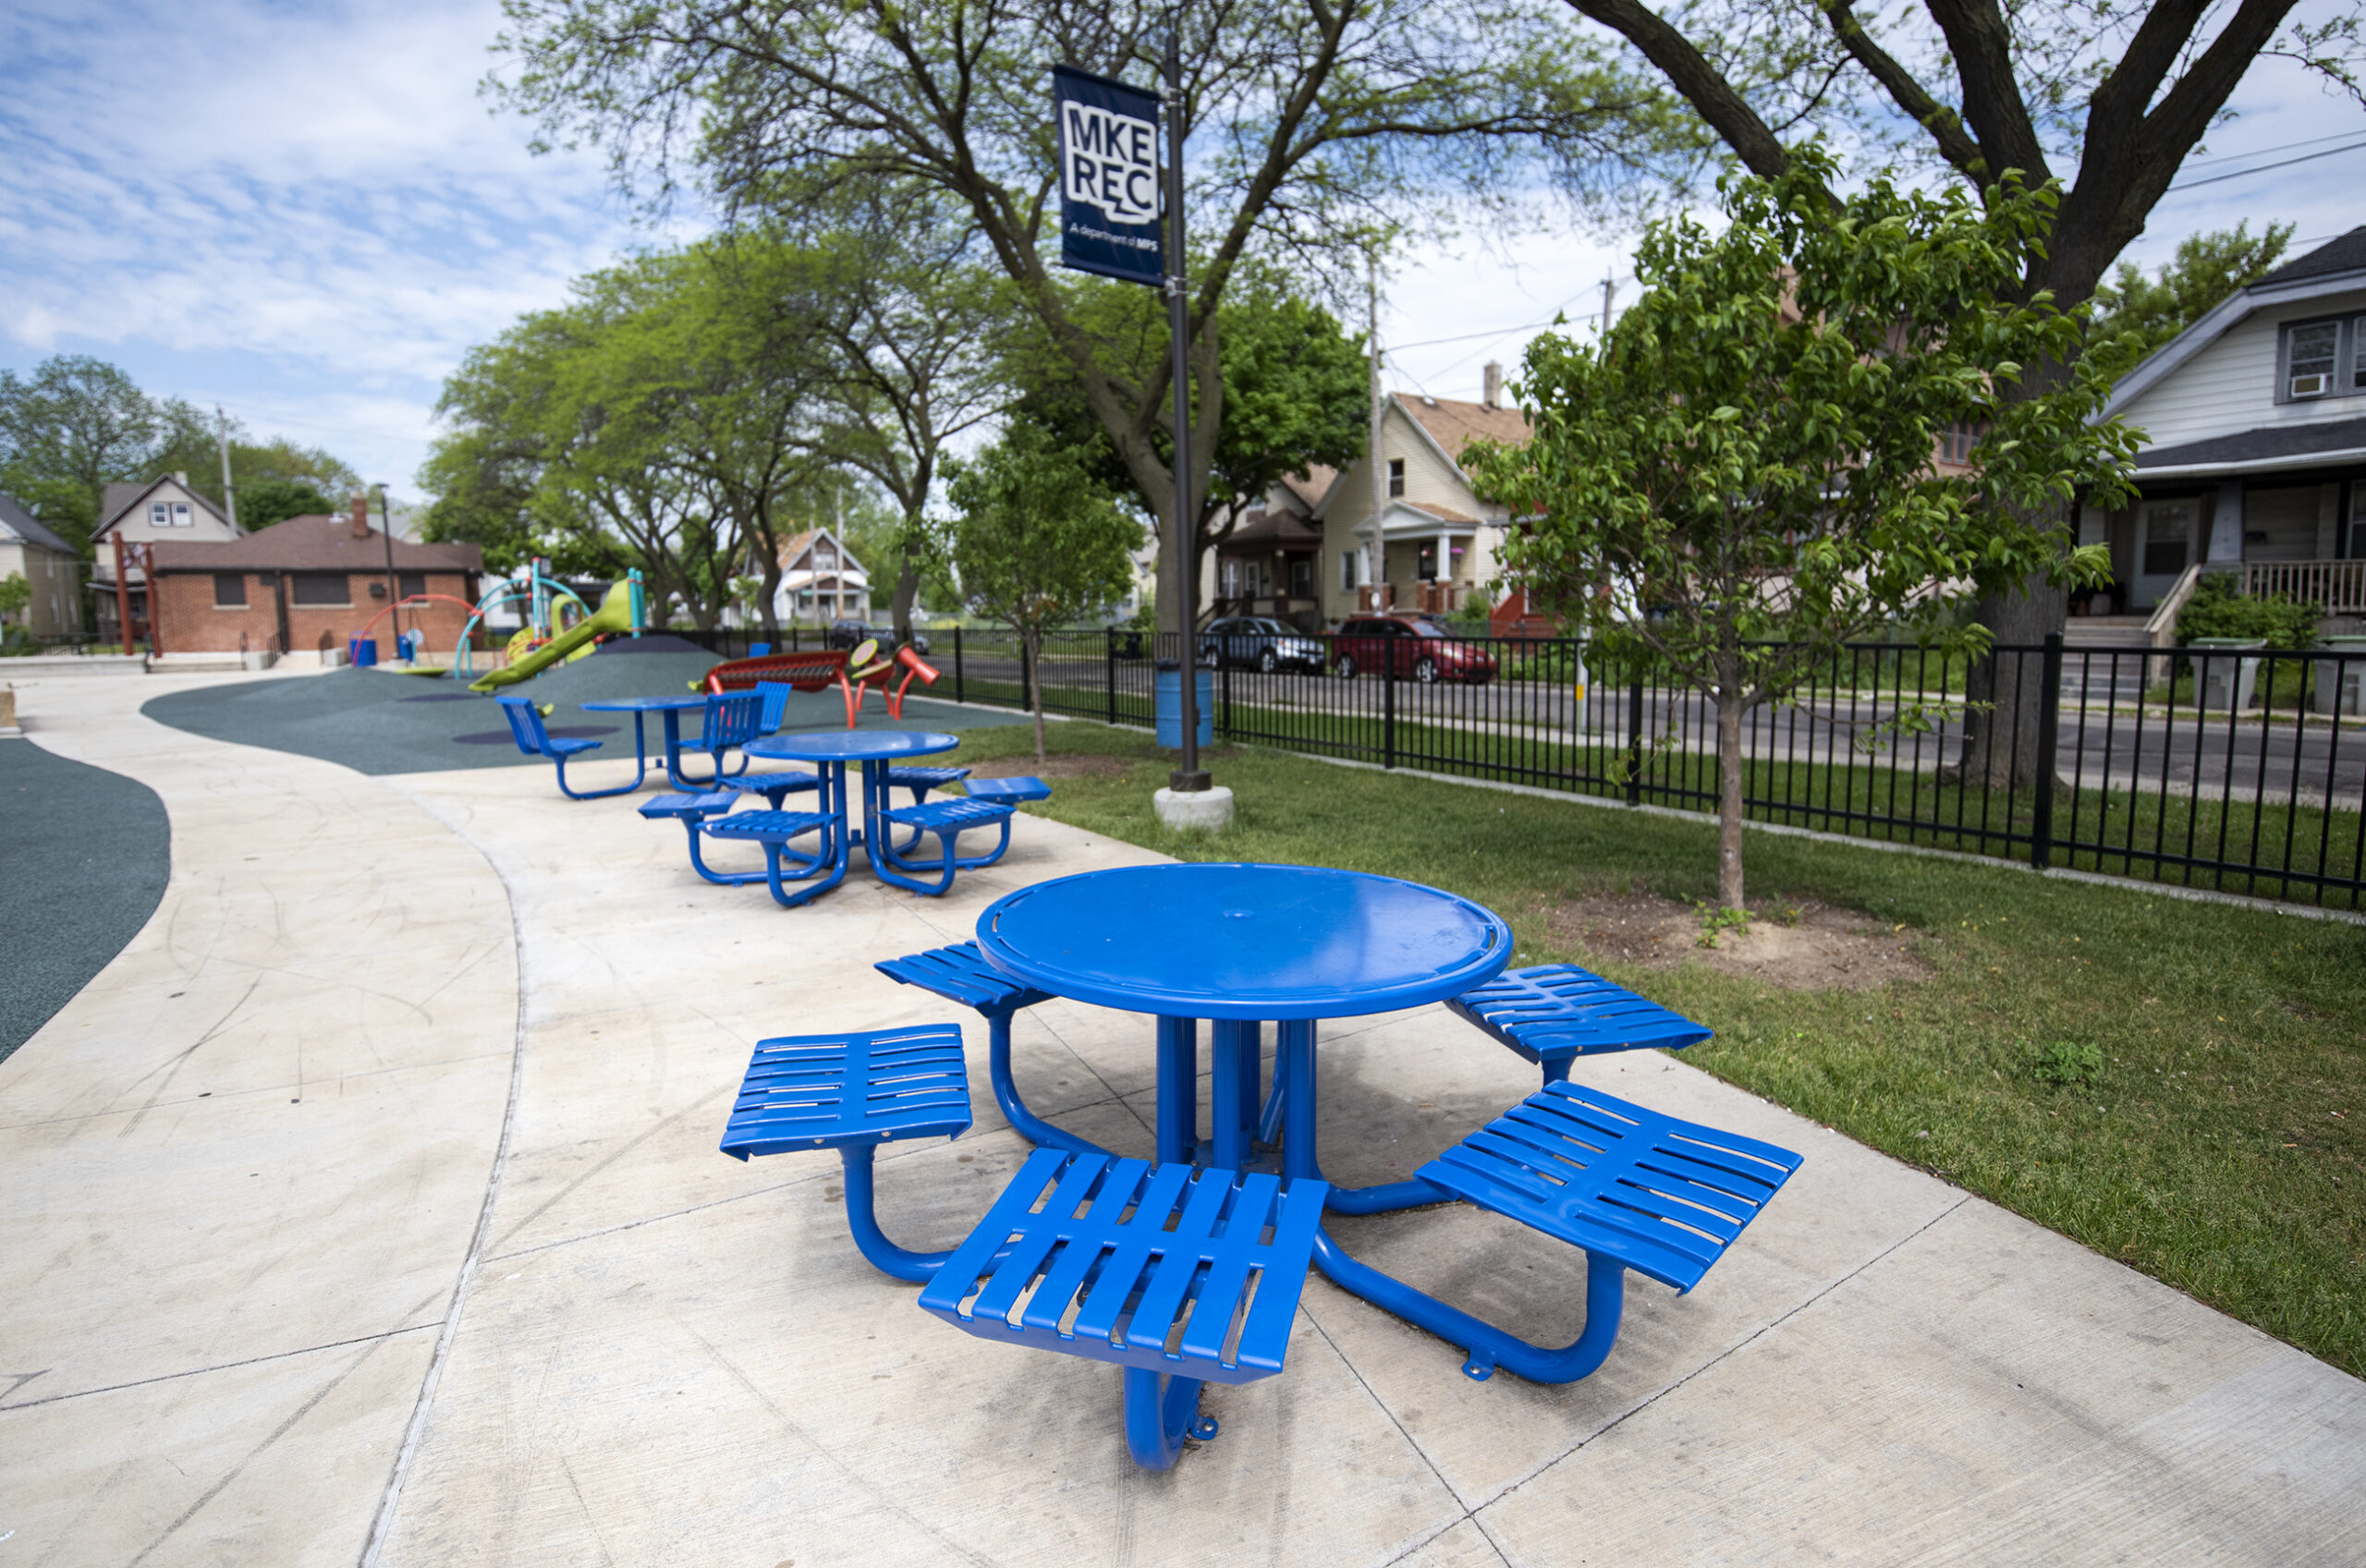 A blue picnic table at a park on a sunny day.